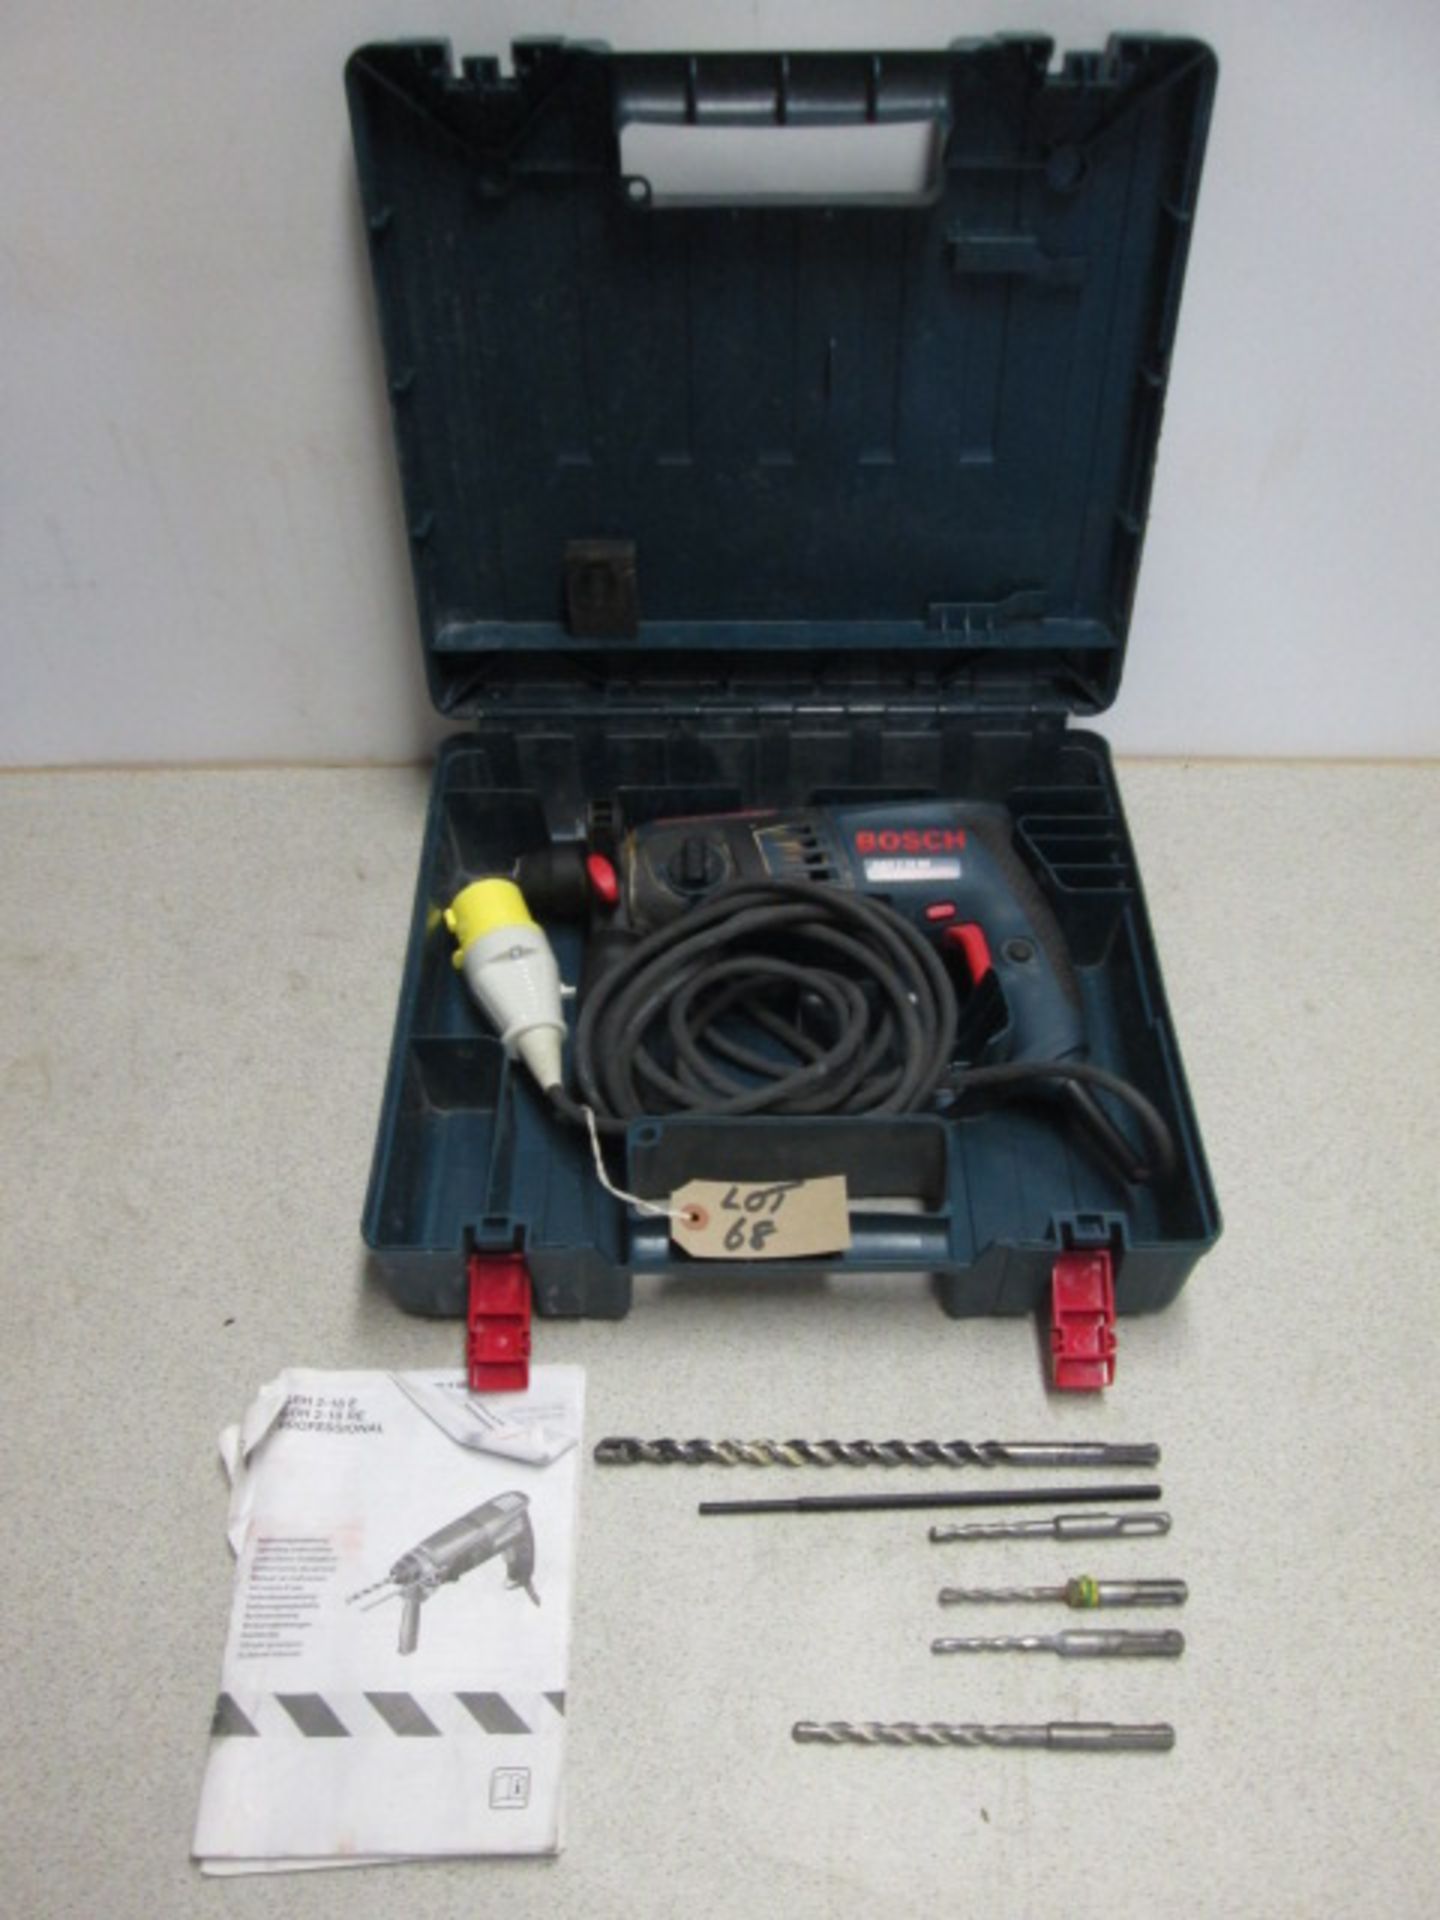 Bosch Hammer GBH-2-18-RE Professional 110v Hammer Drill In Case, with 5 Drill Bits & Instruction